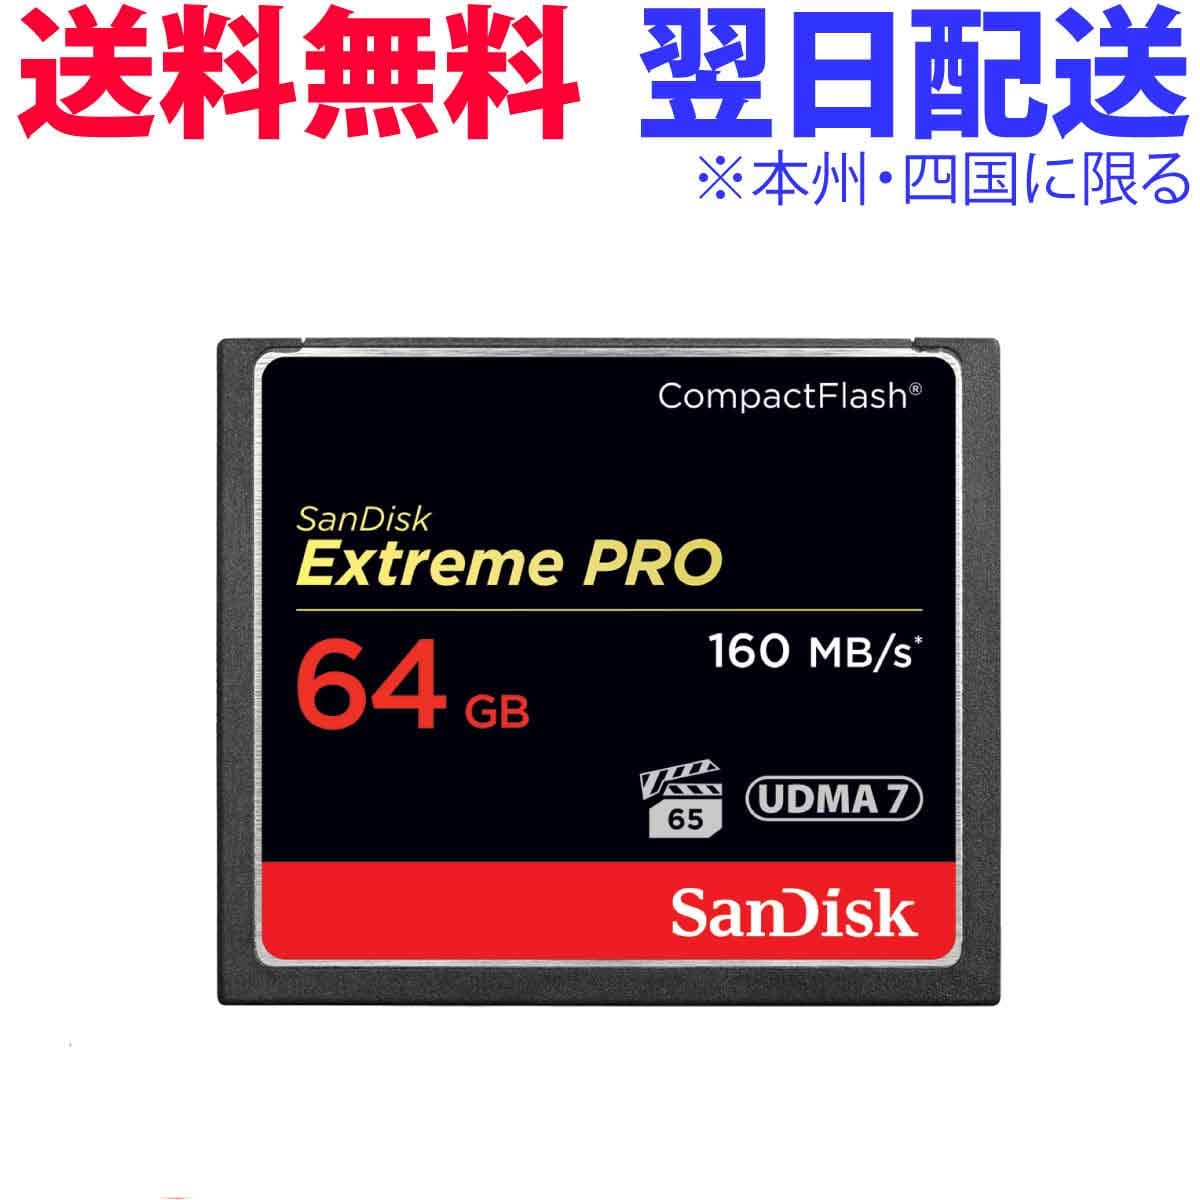 New]Compact Flash CF card 64GB SanDisk EXTREME PRO 1067 double speed  foreign countries package product SDCFXPS-064G-X46 SDCFXPS-064G-J35 SDCFXPS- 064G-A46 SDCFXPS-064G-XQ46 SDCFXPS-064G-46S - BE FORWARD Store